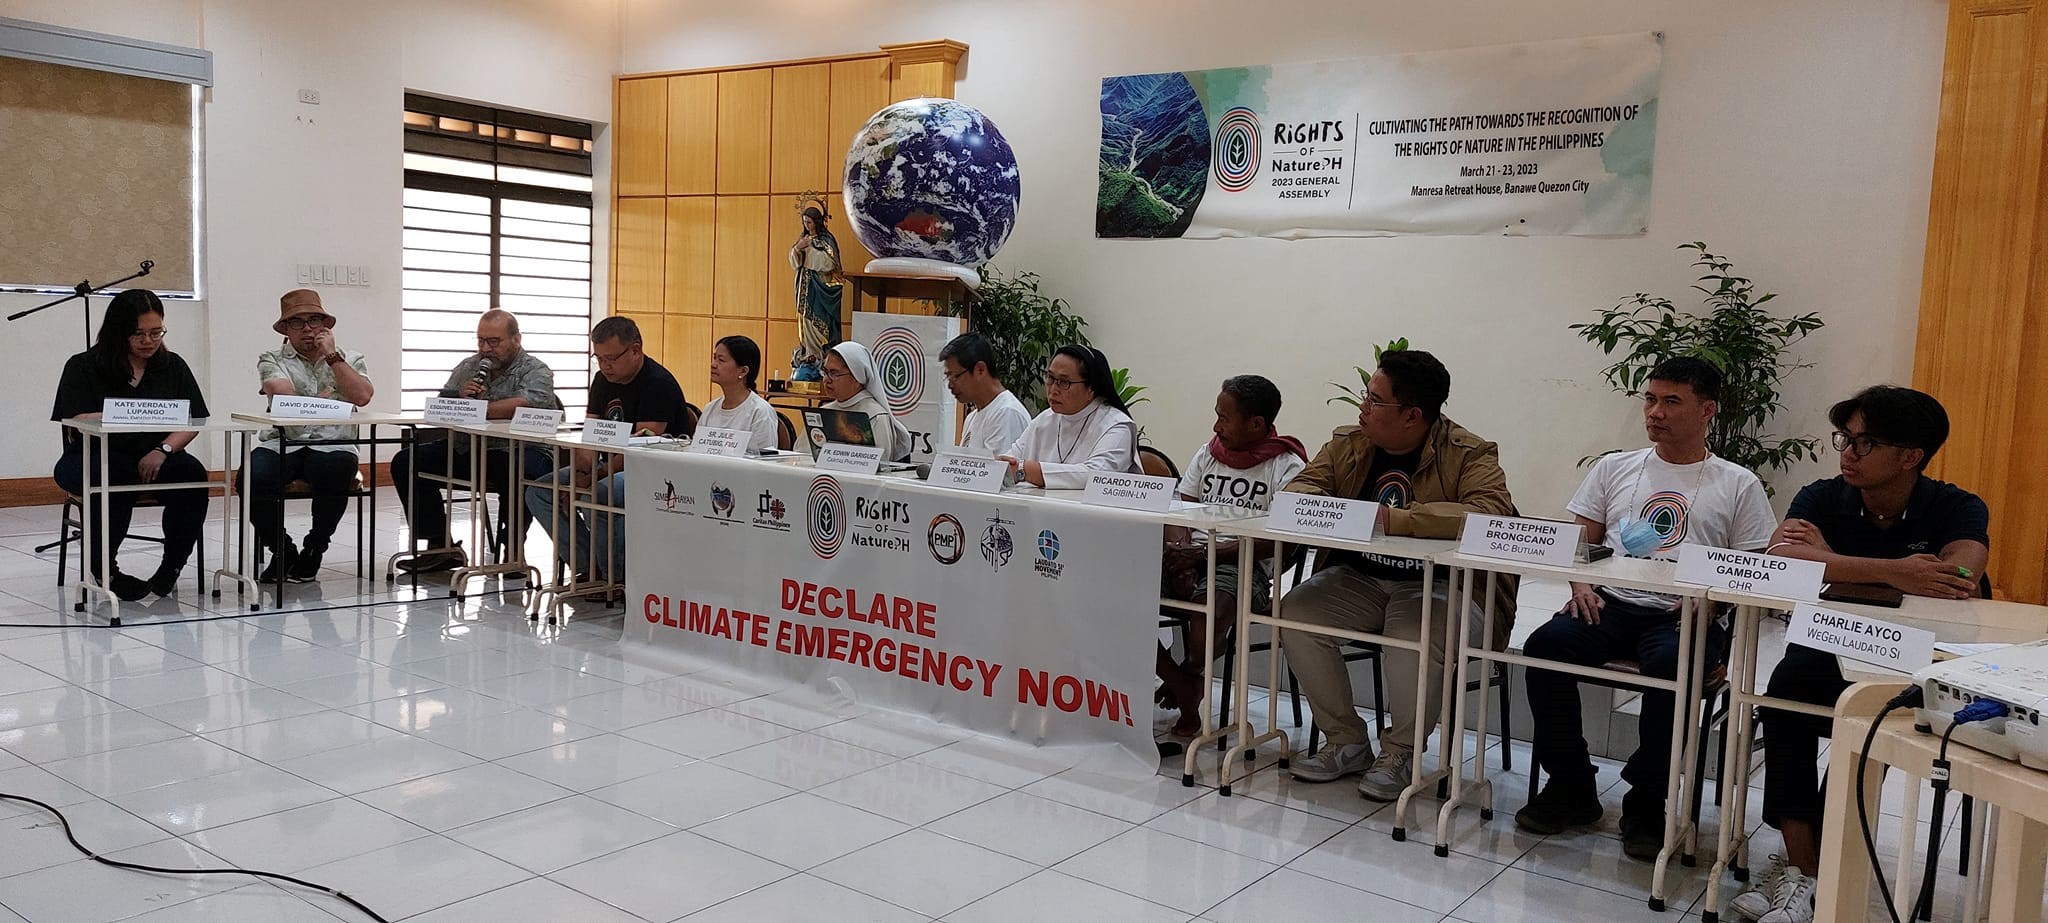 General Assembly of the Rights of Nature Philippines